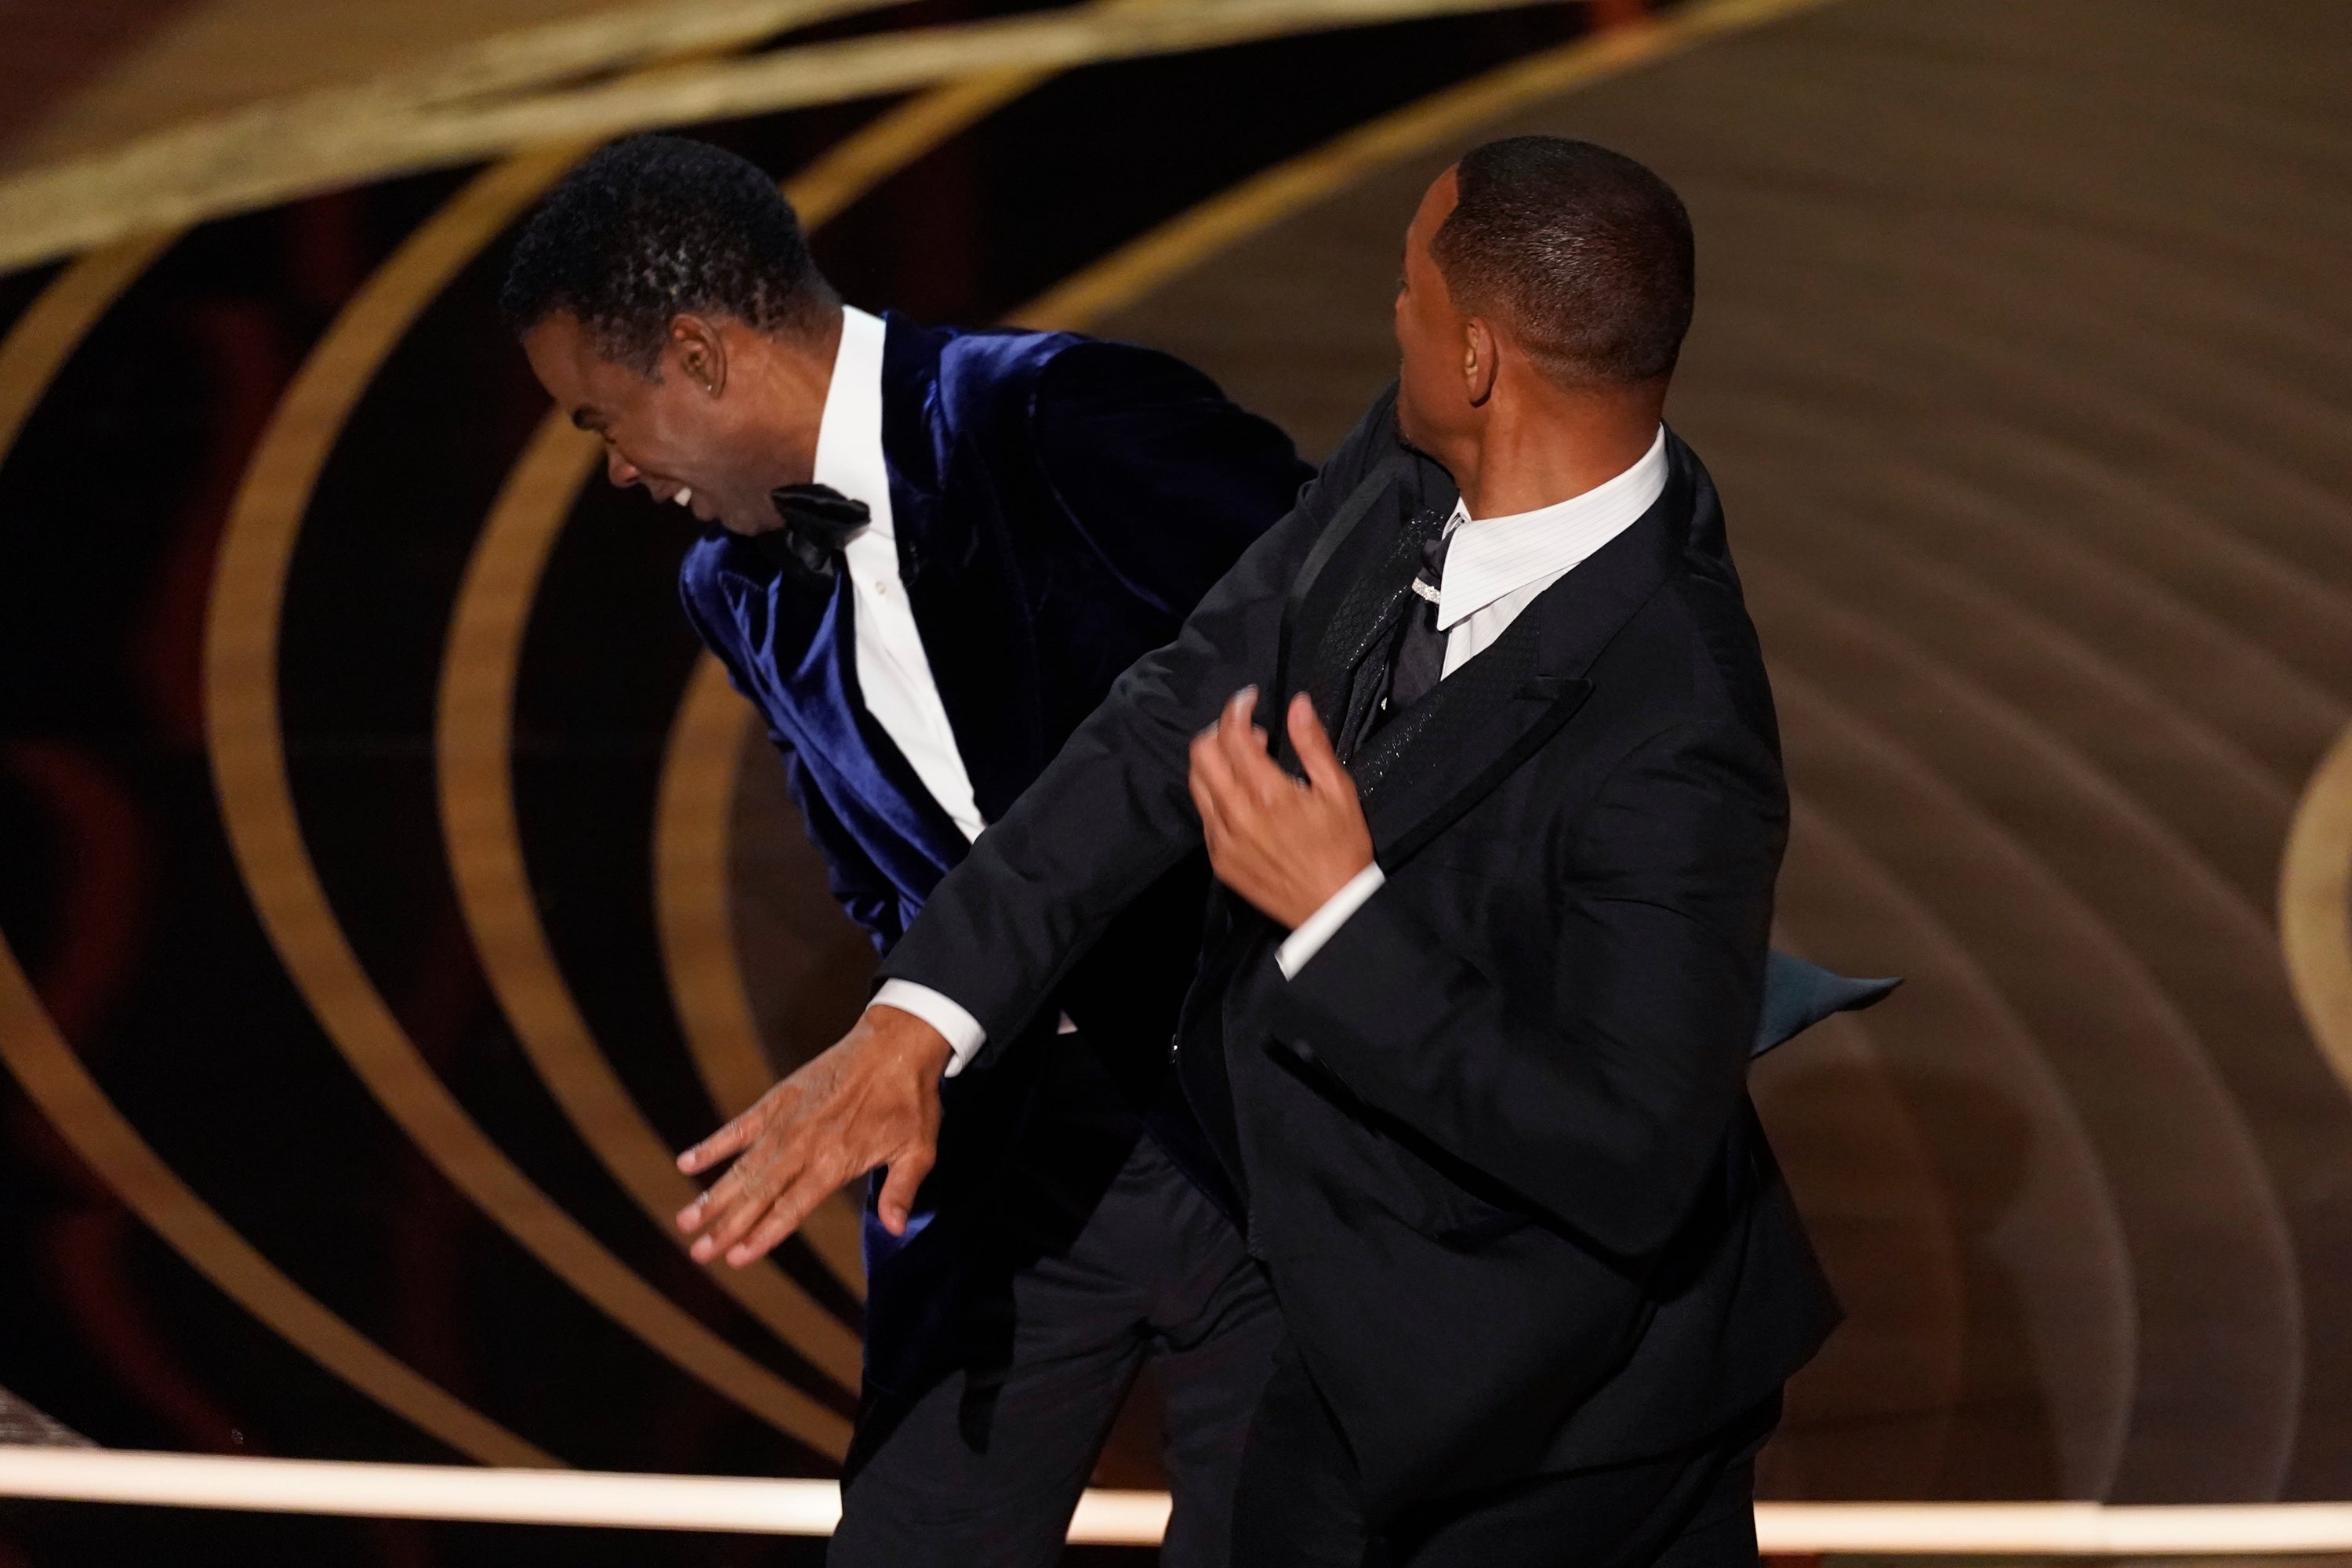 Will Smith strikes Chris Rock on stage at the Oscars